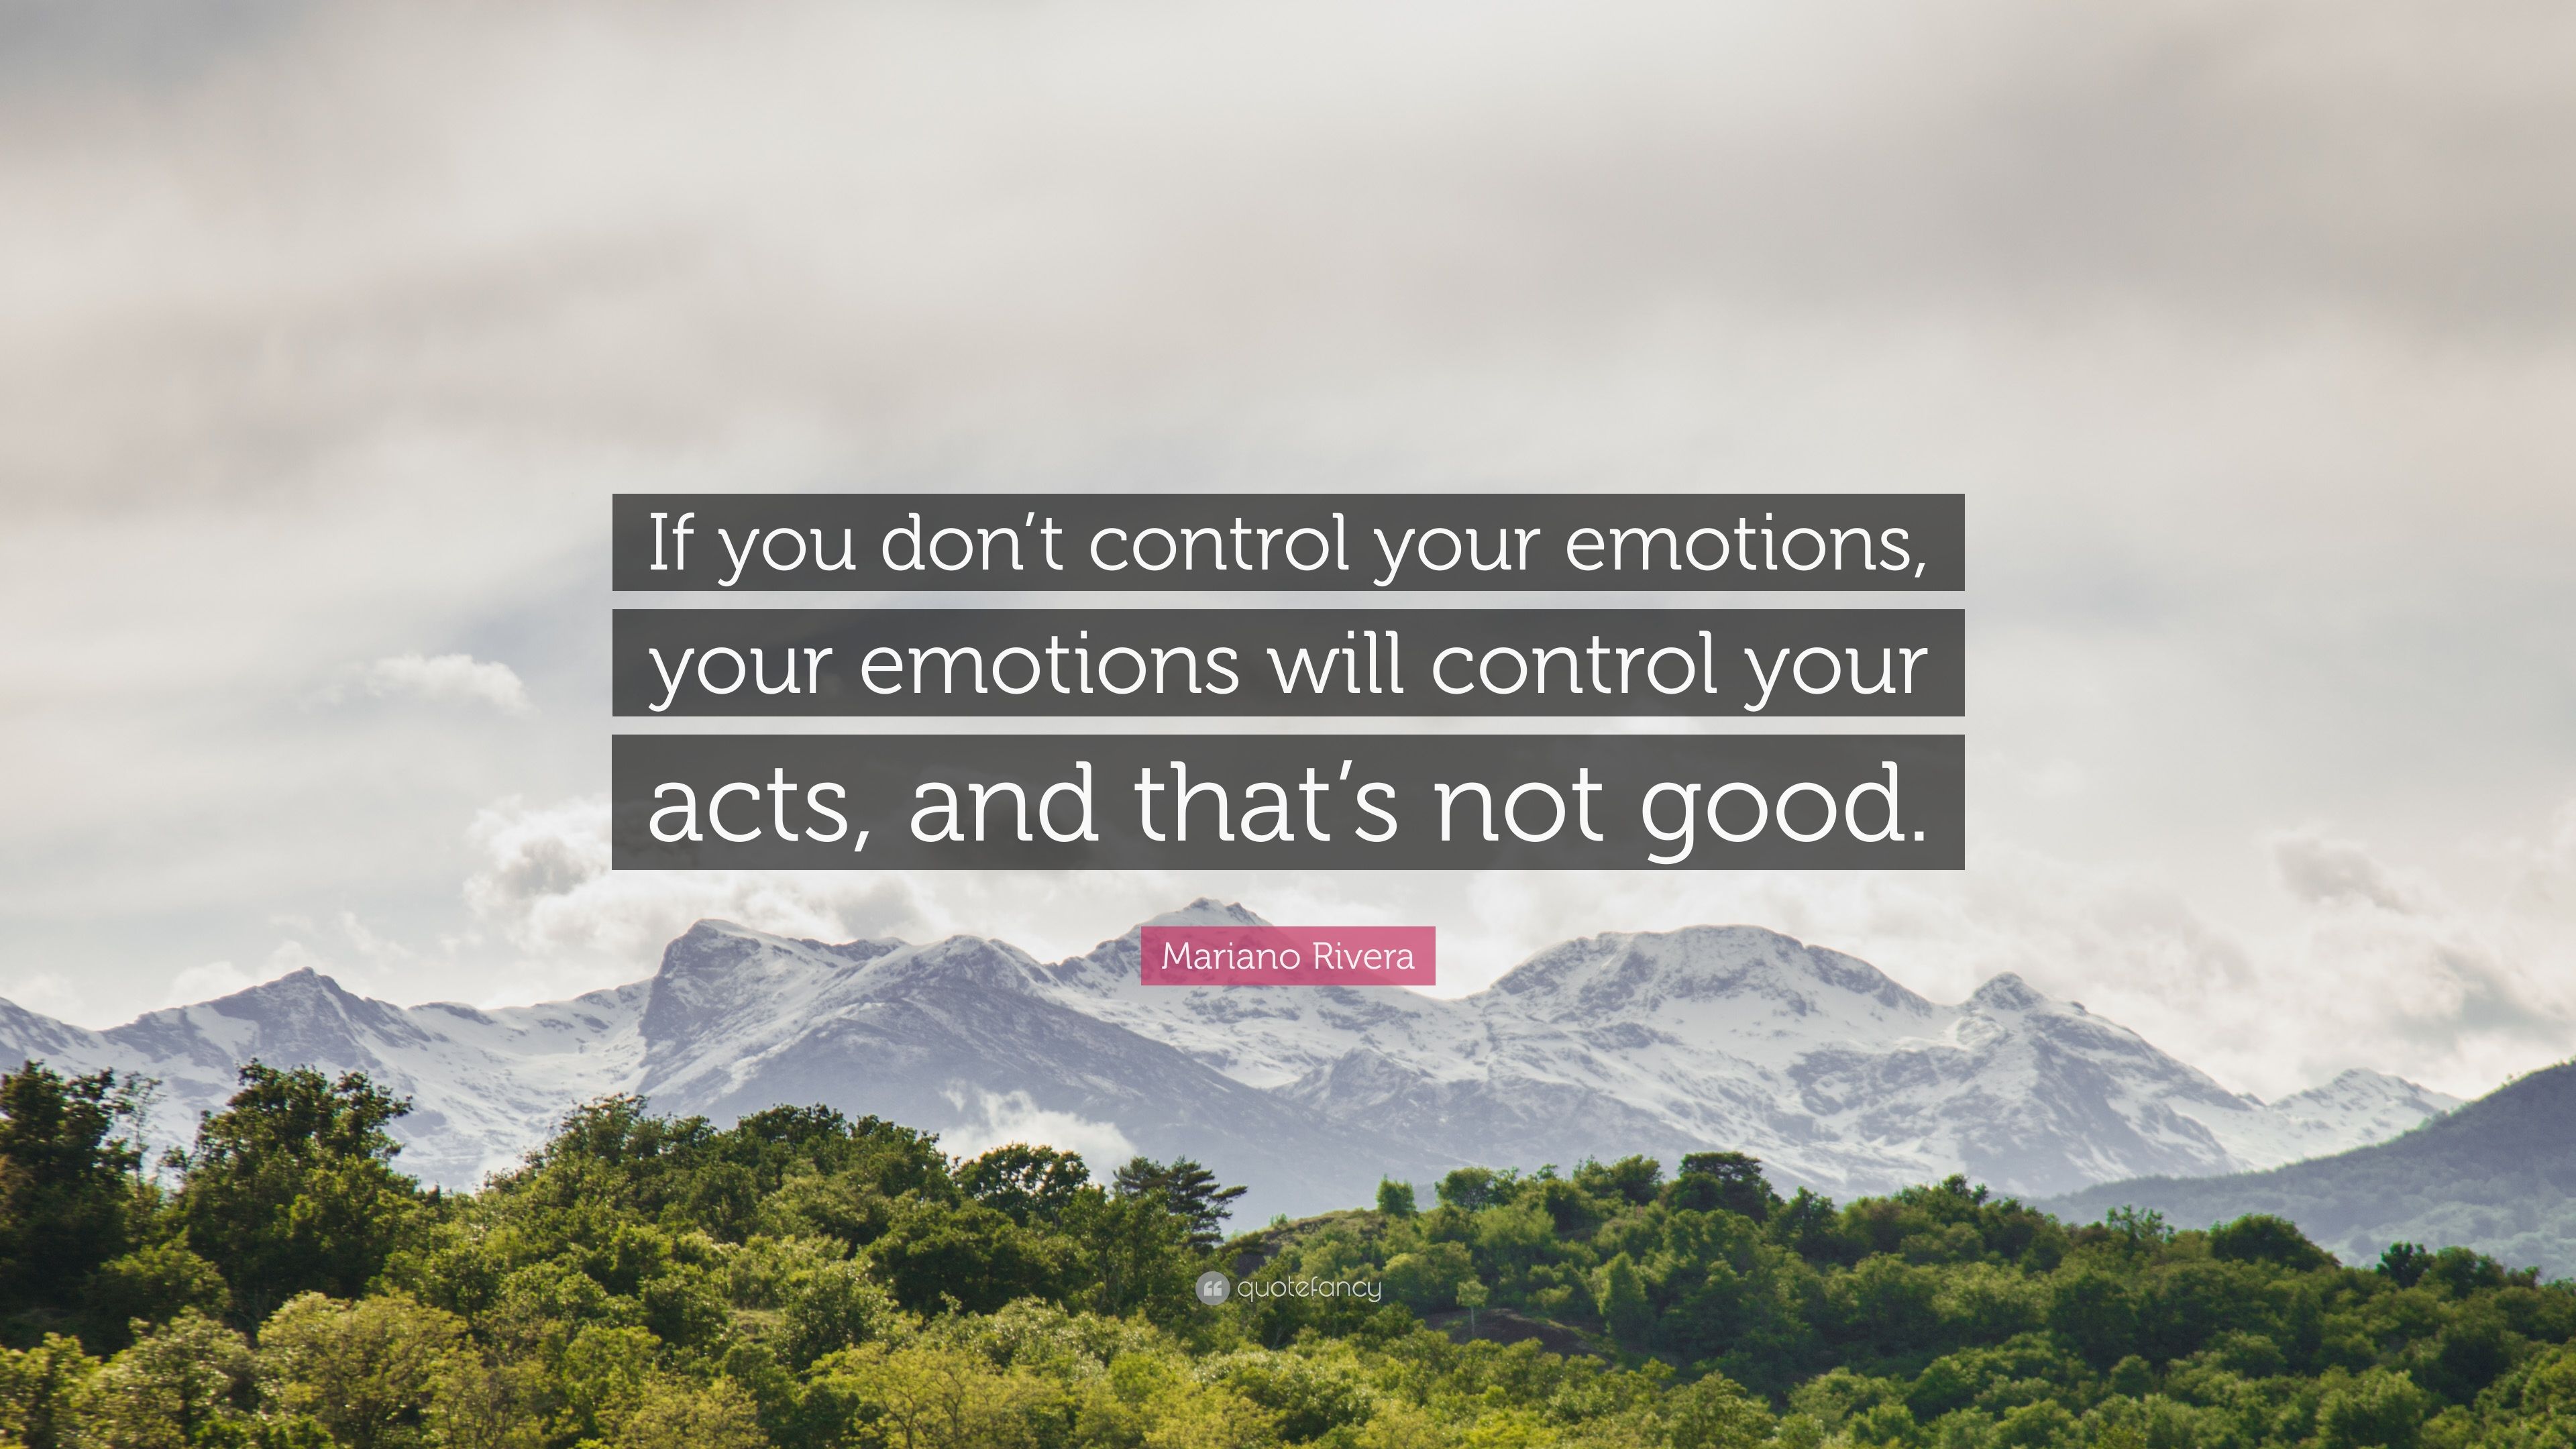 Mariano Rivera Quote: “If you don't control your emotions, your emotions will control your acts, and that's not good.” (9 wallpaper)